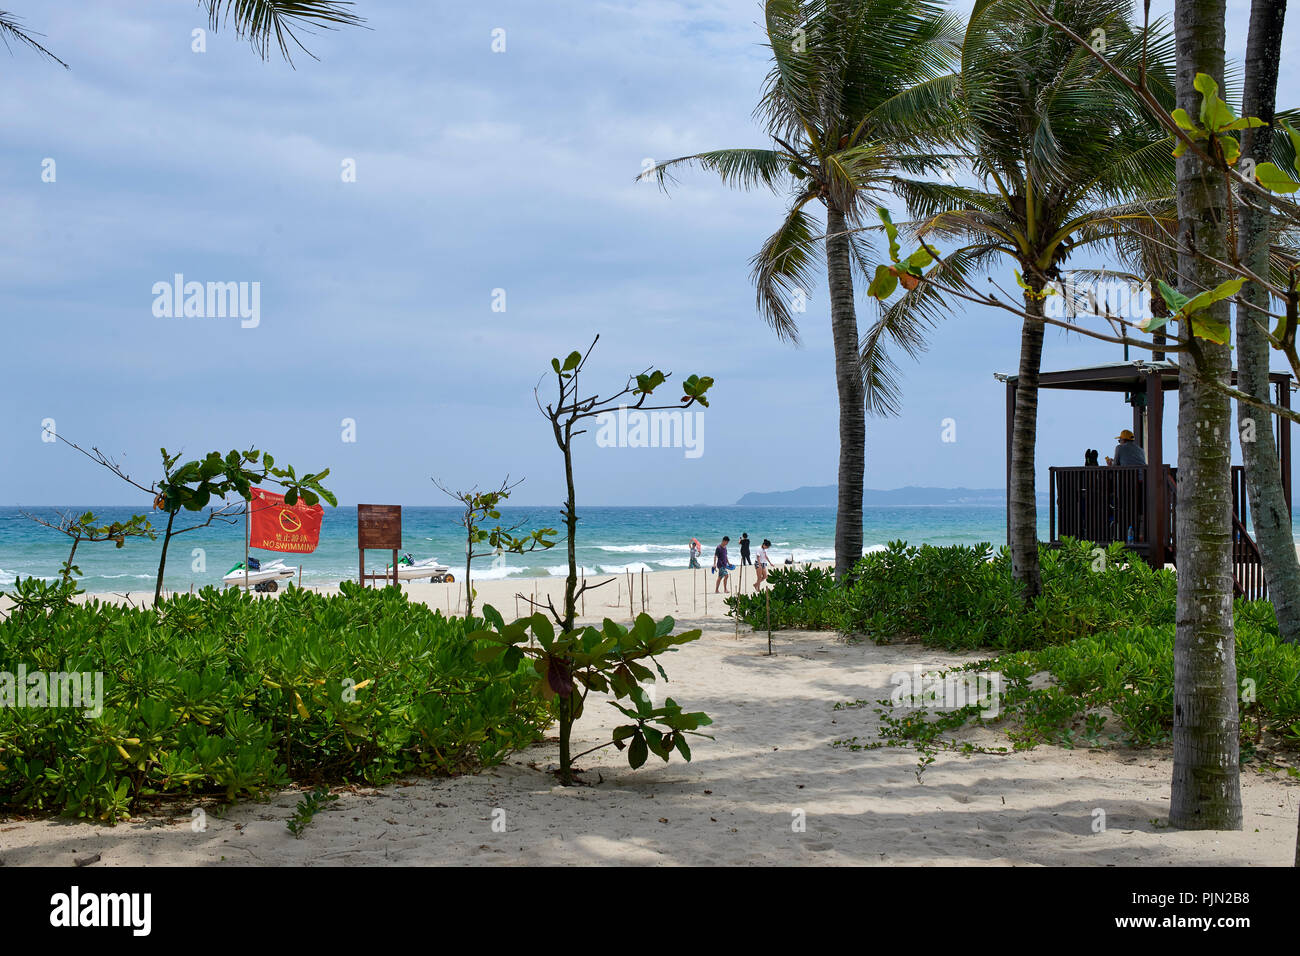 Sandy beach at the seaside, Sanya, on a windy summer day. 'No swimming' flags visible Stock Photo